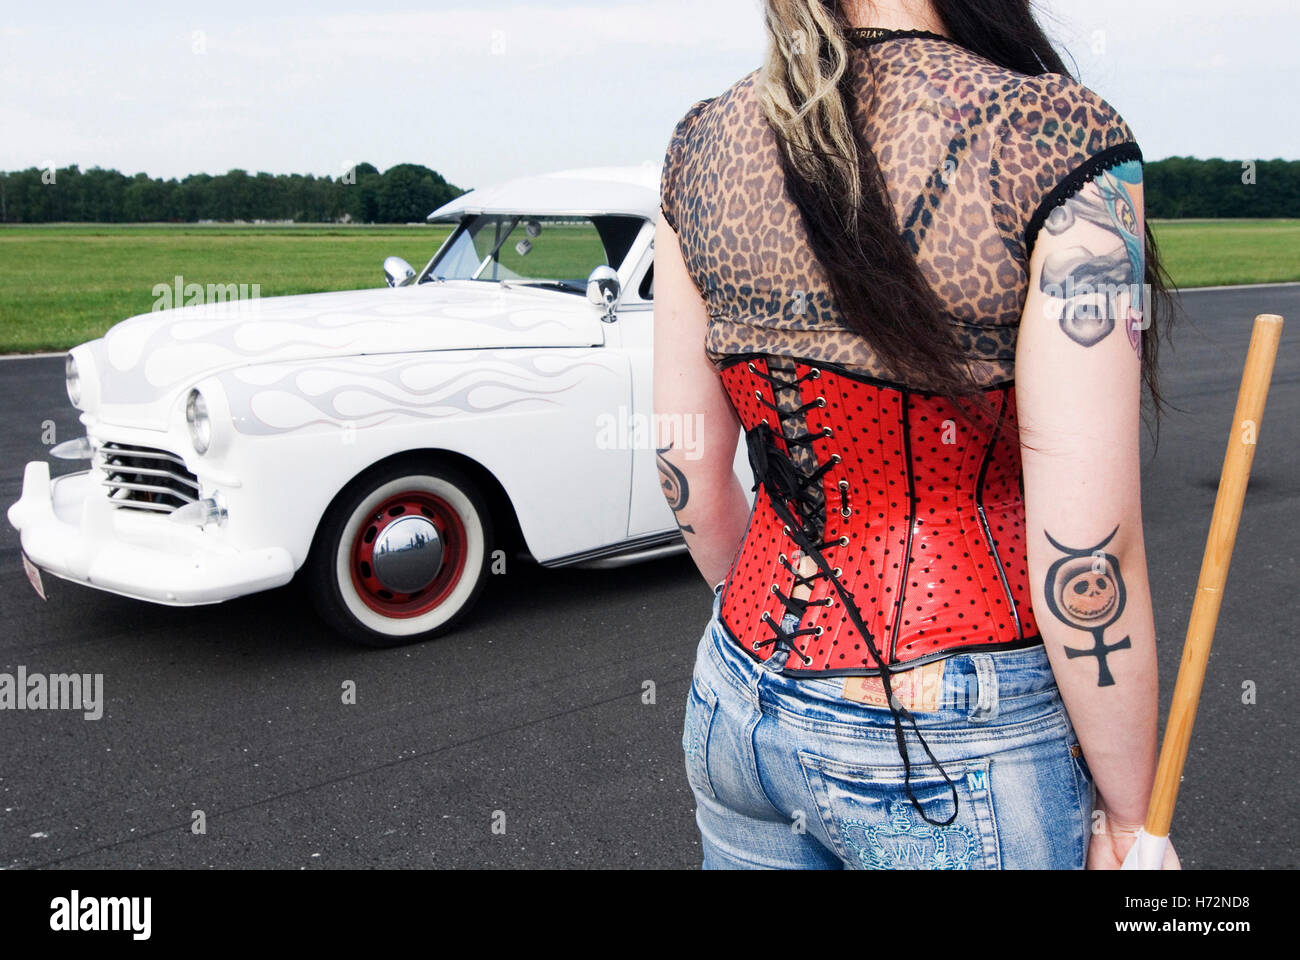 Starter girl with a red corsage and tattoos next to a white limousine, Hot Rods, Kustoms, Cruisers & Art at the "Bottrop Kustom Stock Photo